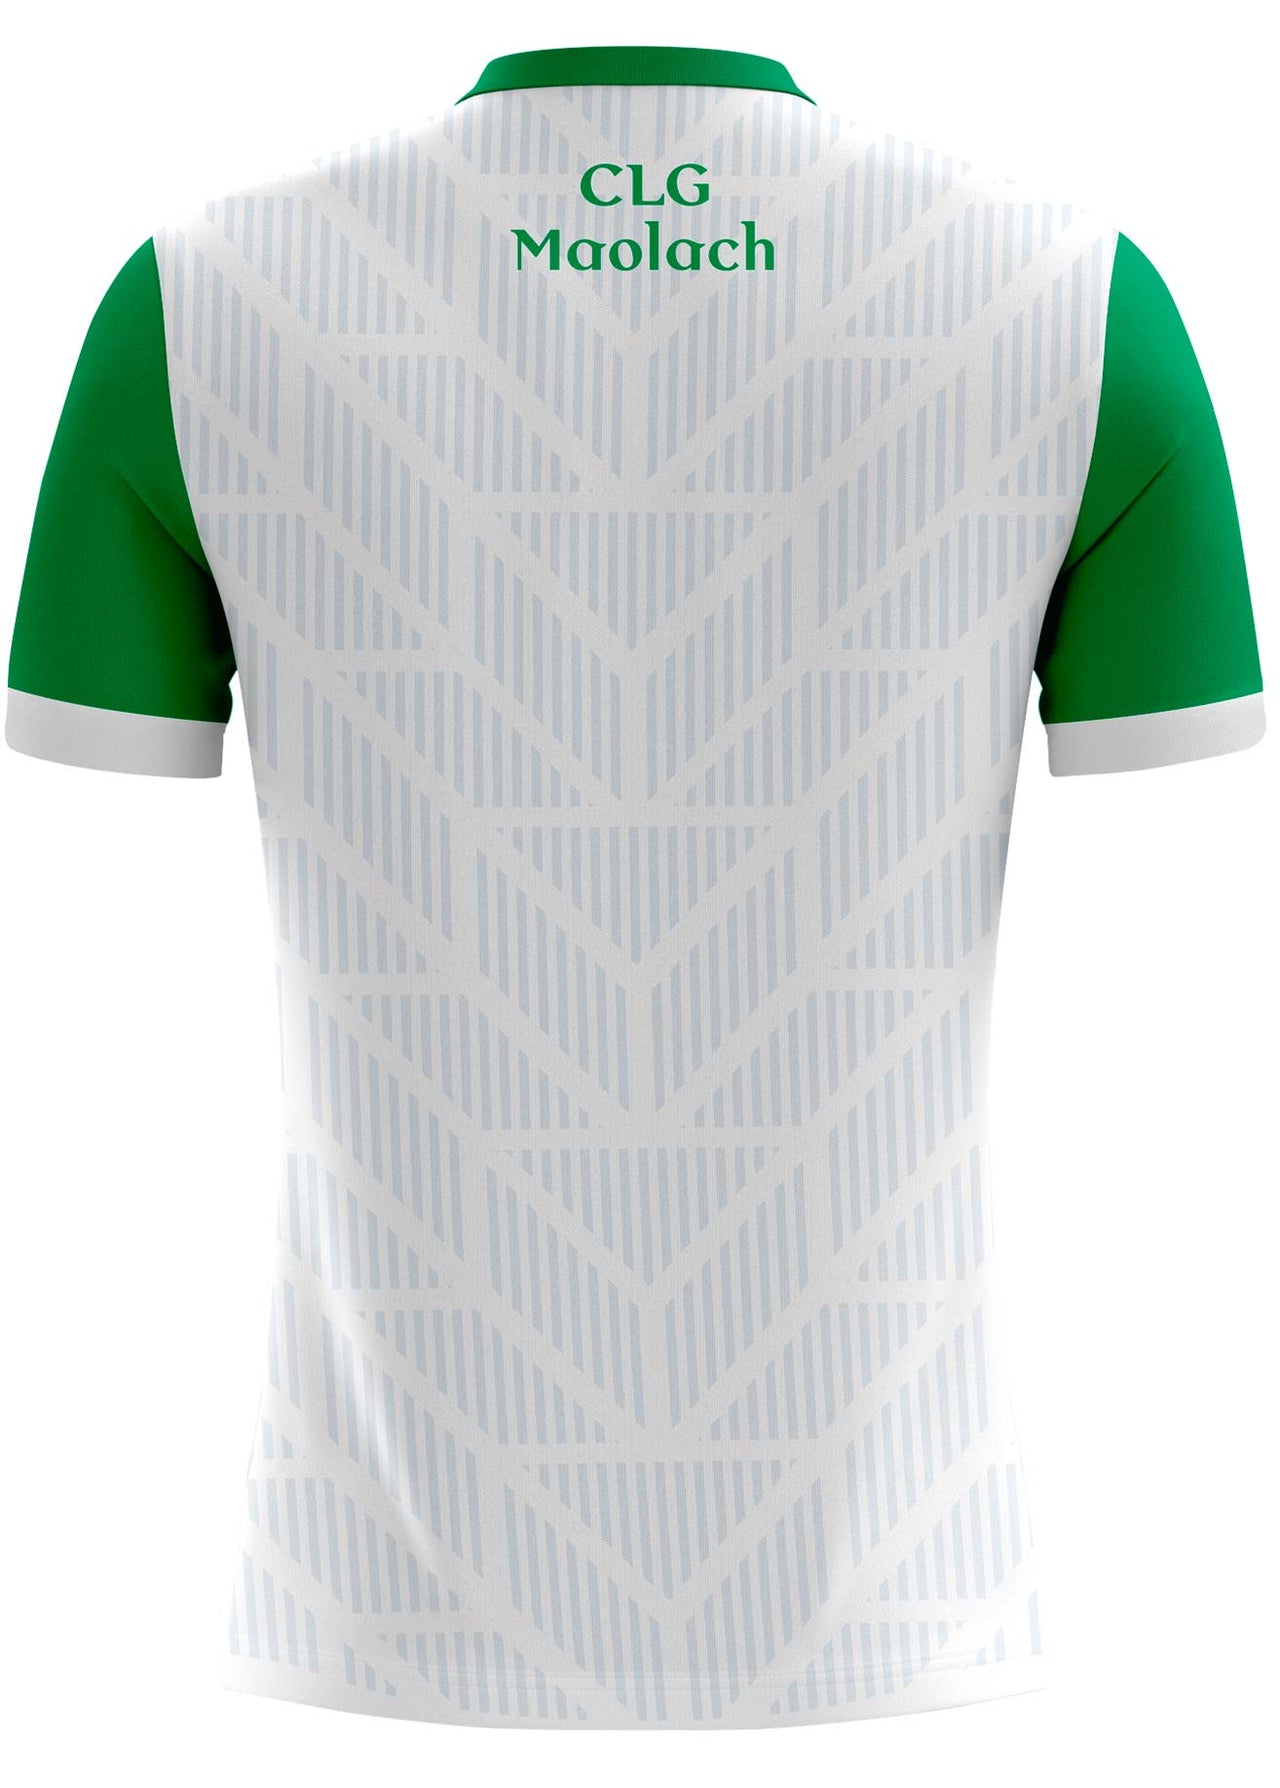 Moylagh CLG Away Jersey Player Fit Adult